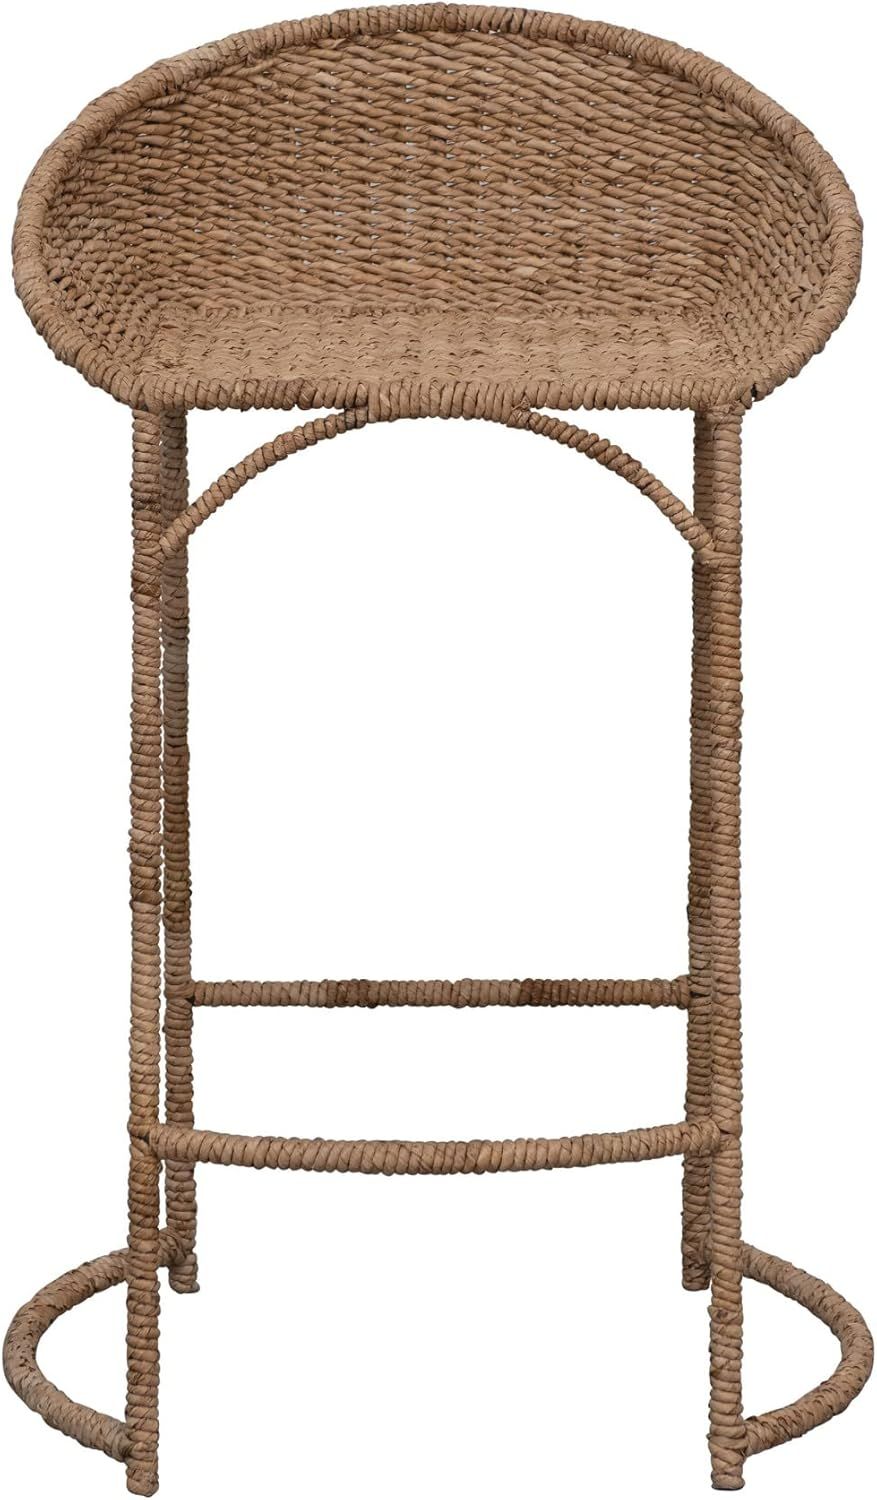 Bloomingville Hand-Woven Seagrass Metal Frame Barstool, Natural | Amazon (US)